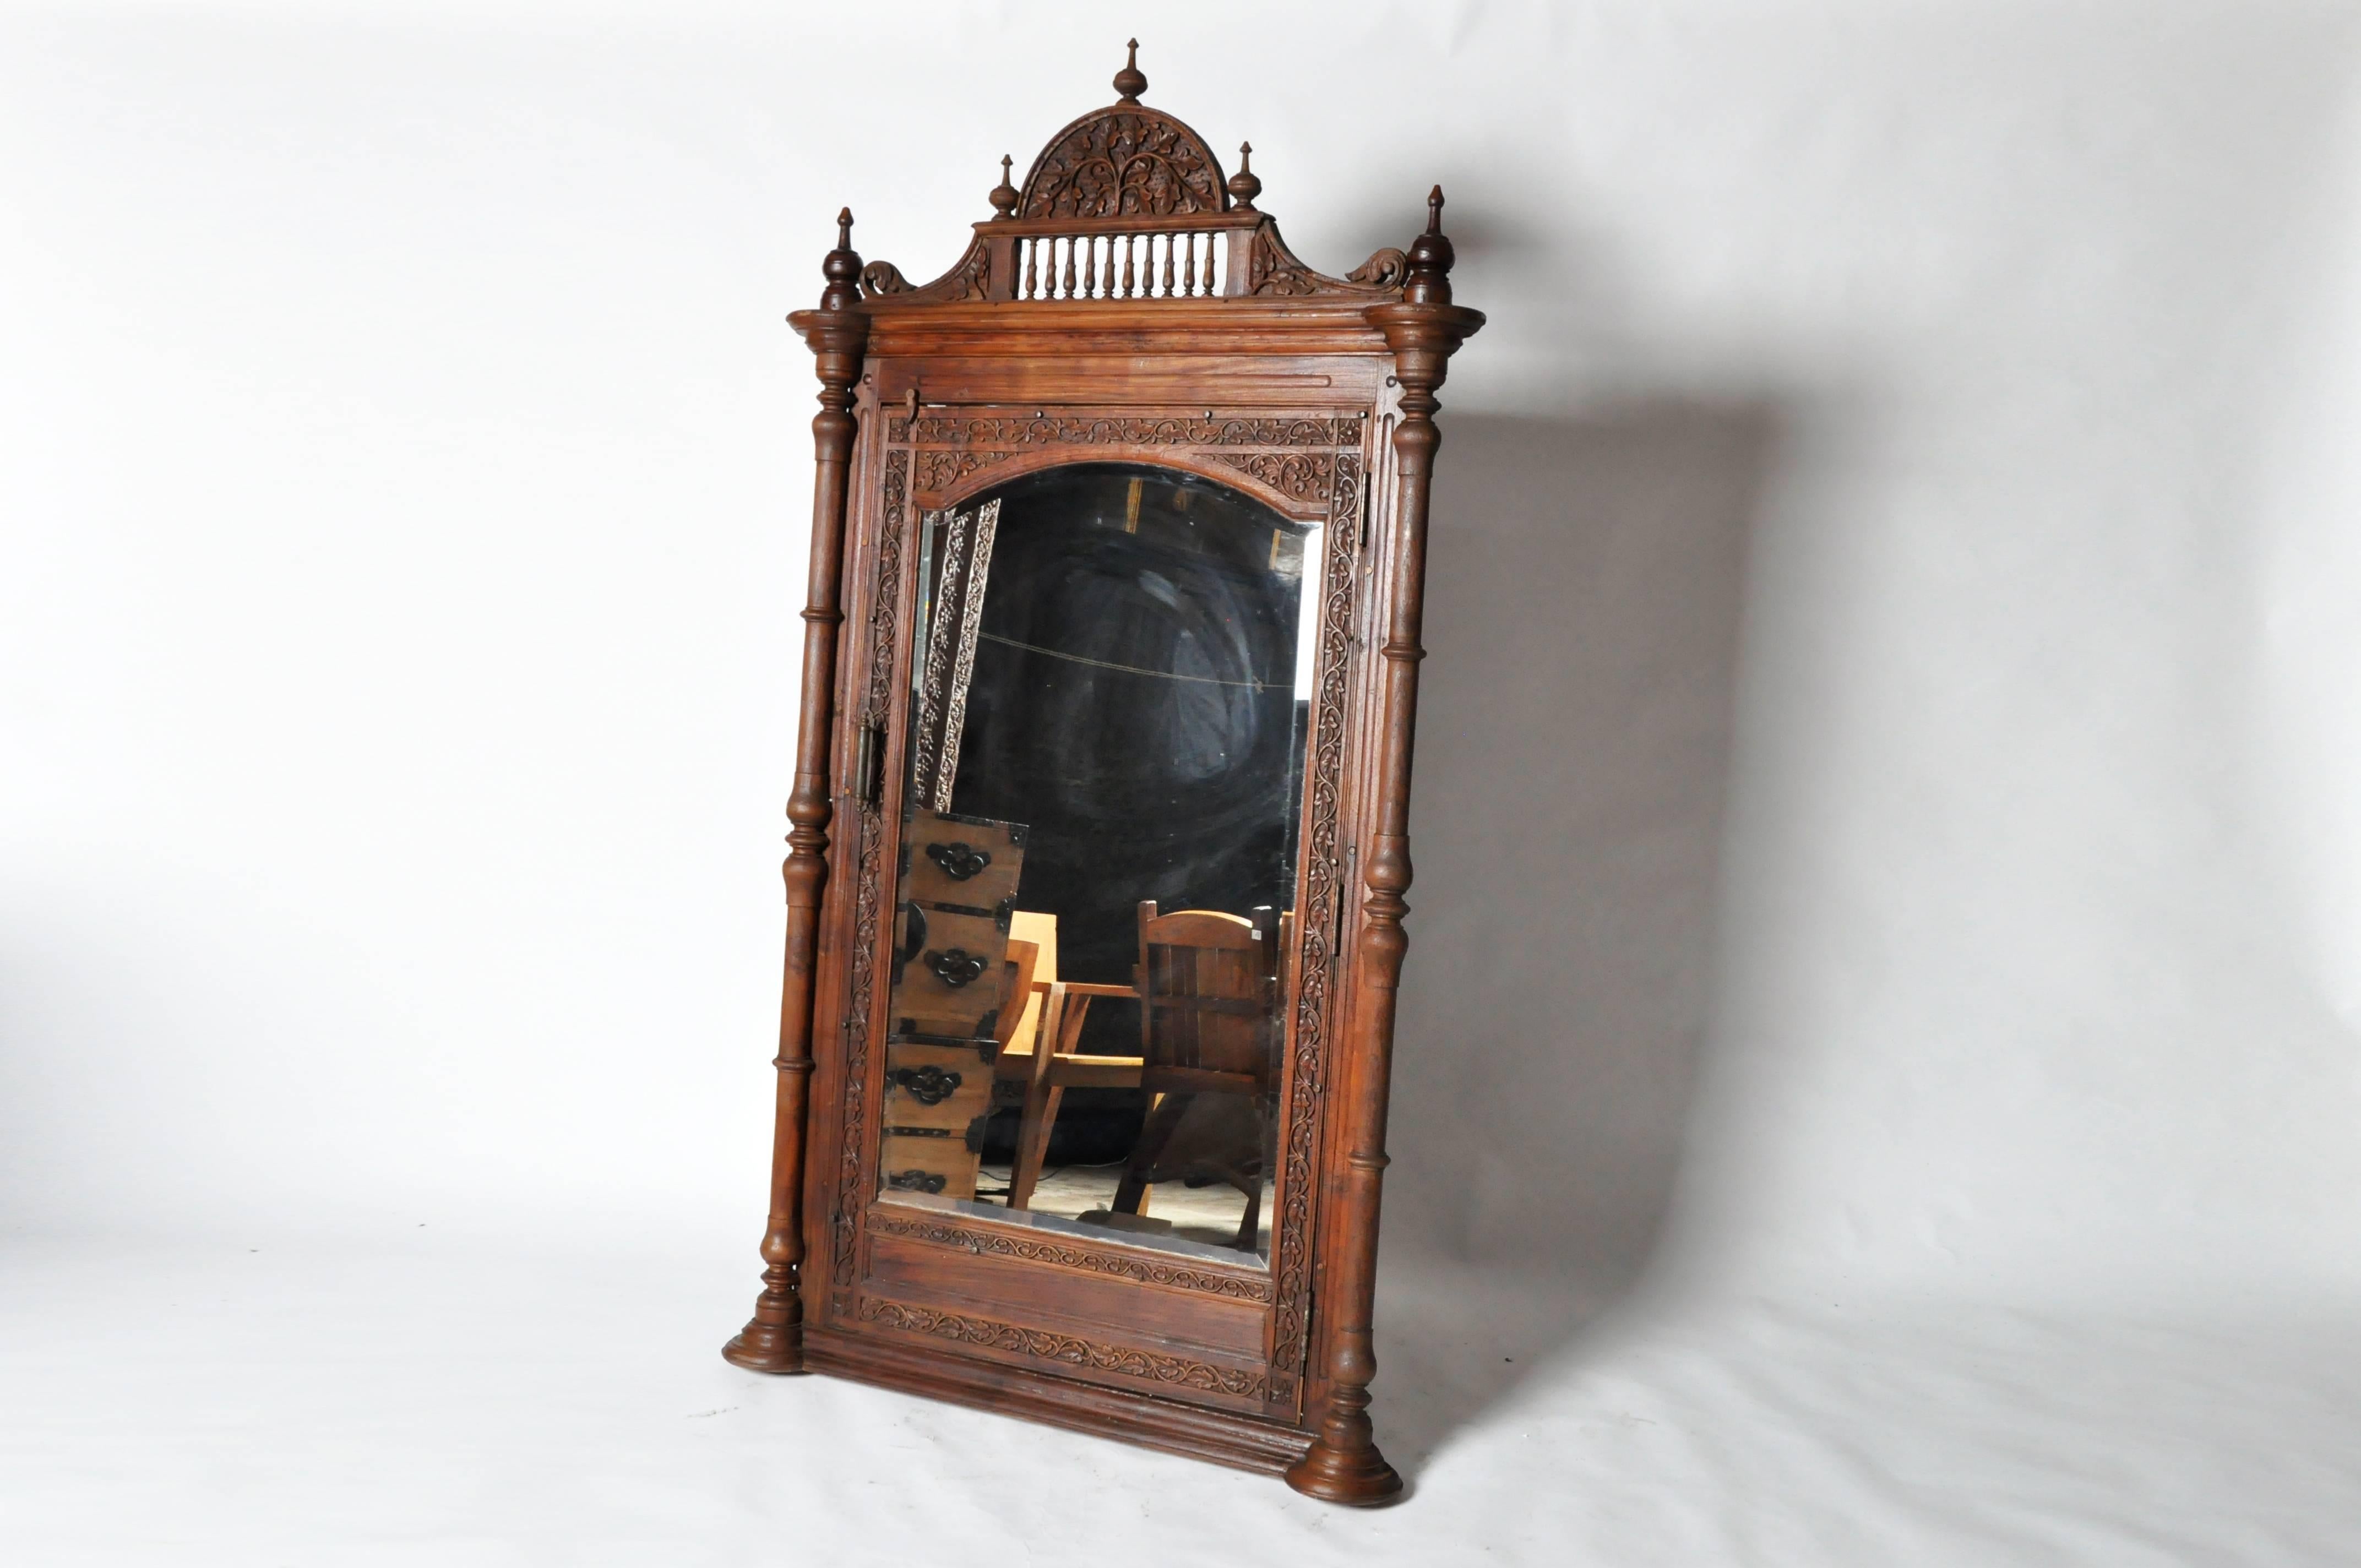 This British Colonial mirror features beautifully hand-carved teak wood and is from Gujarat, India early 20th Century.